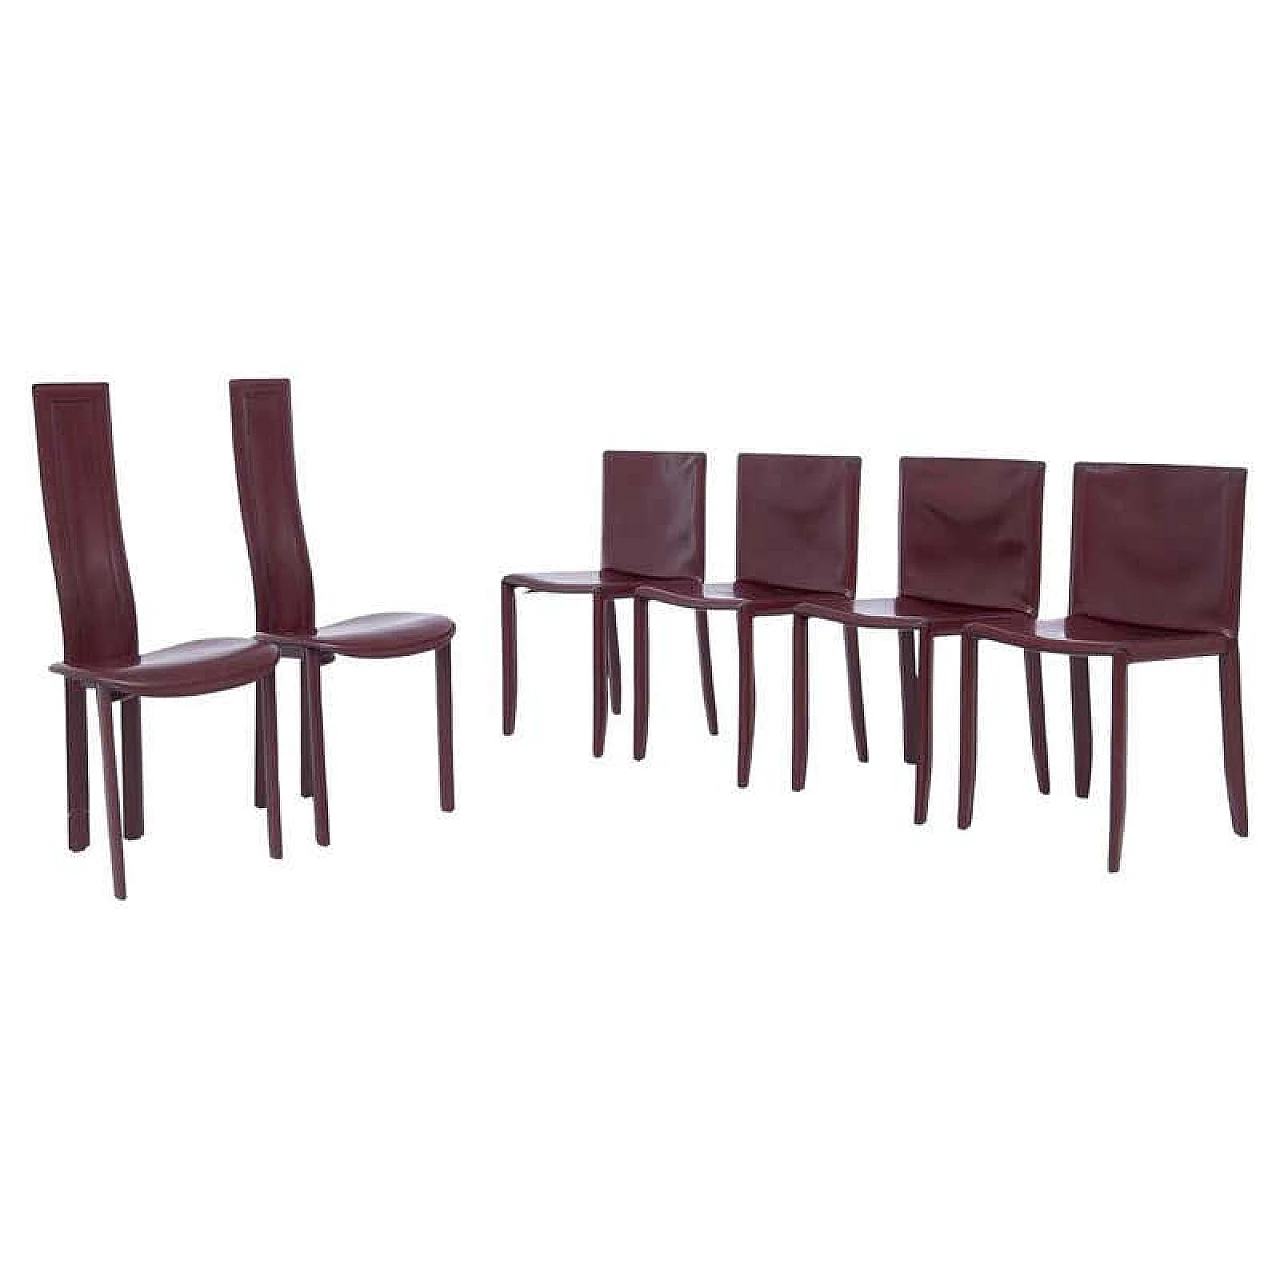 6 burgundy leather table chairs with visible stitching for Cattelan Italia, 1980s 1380236